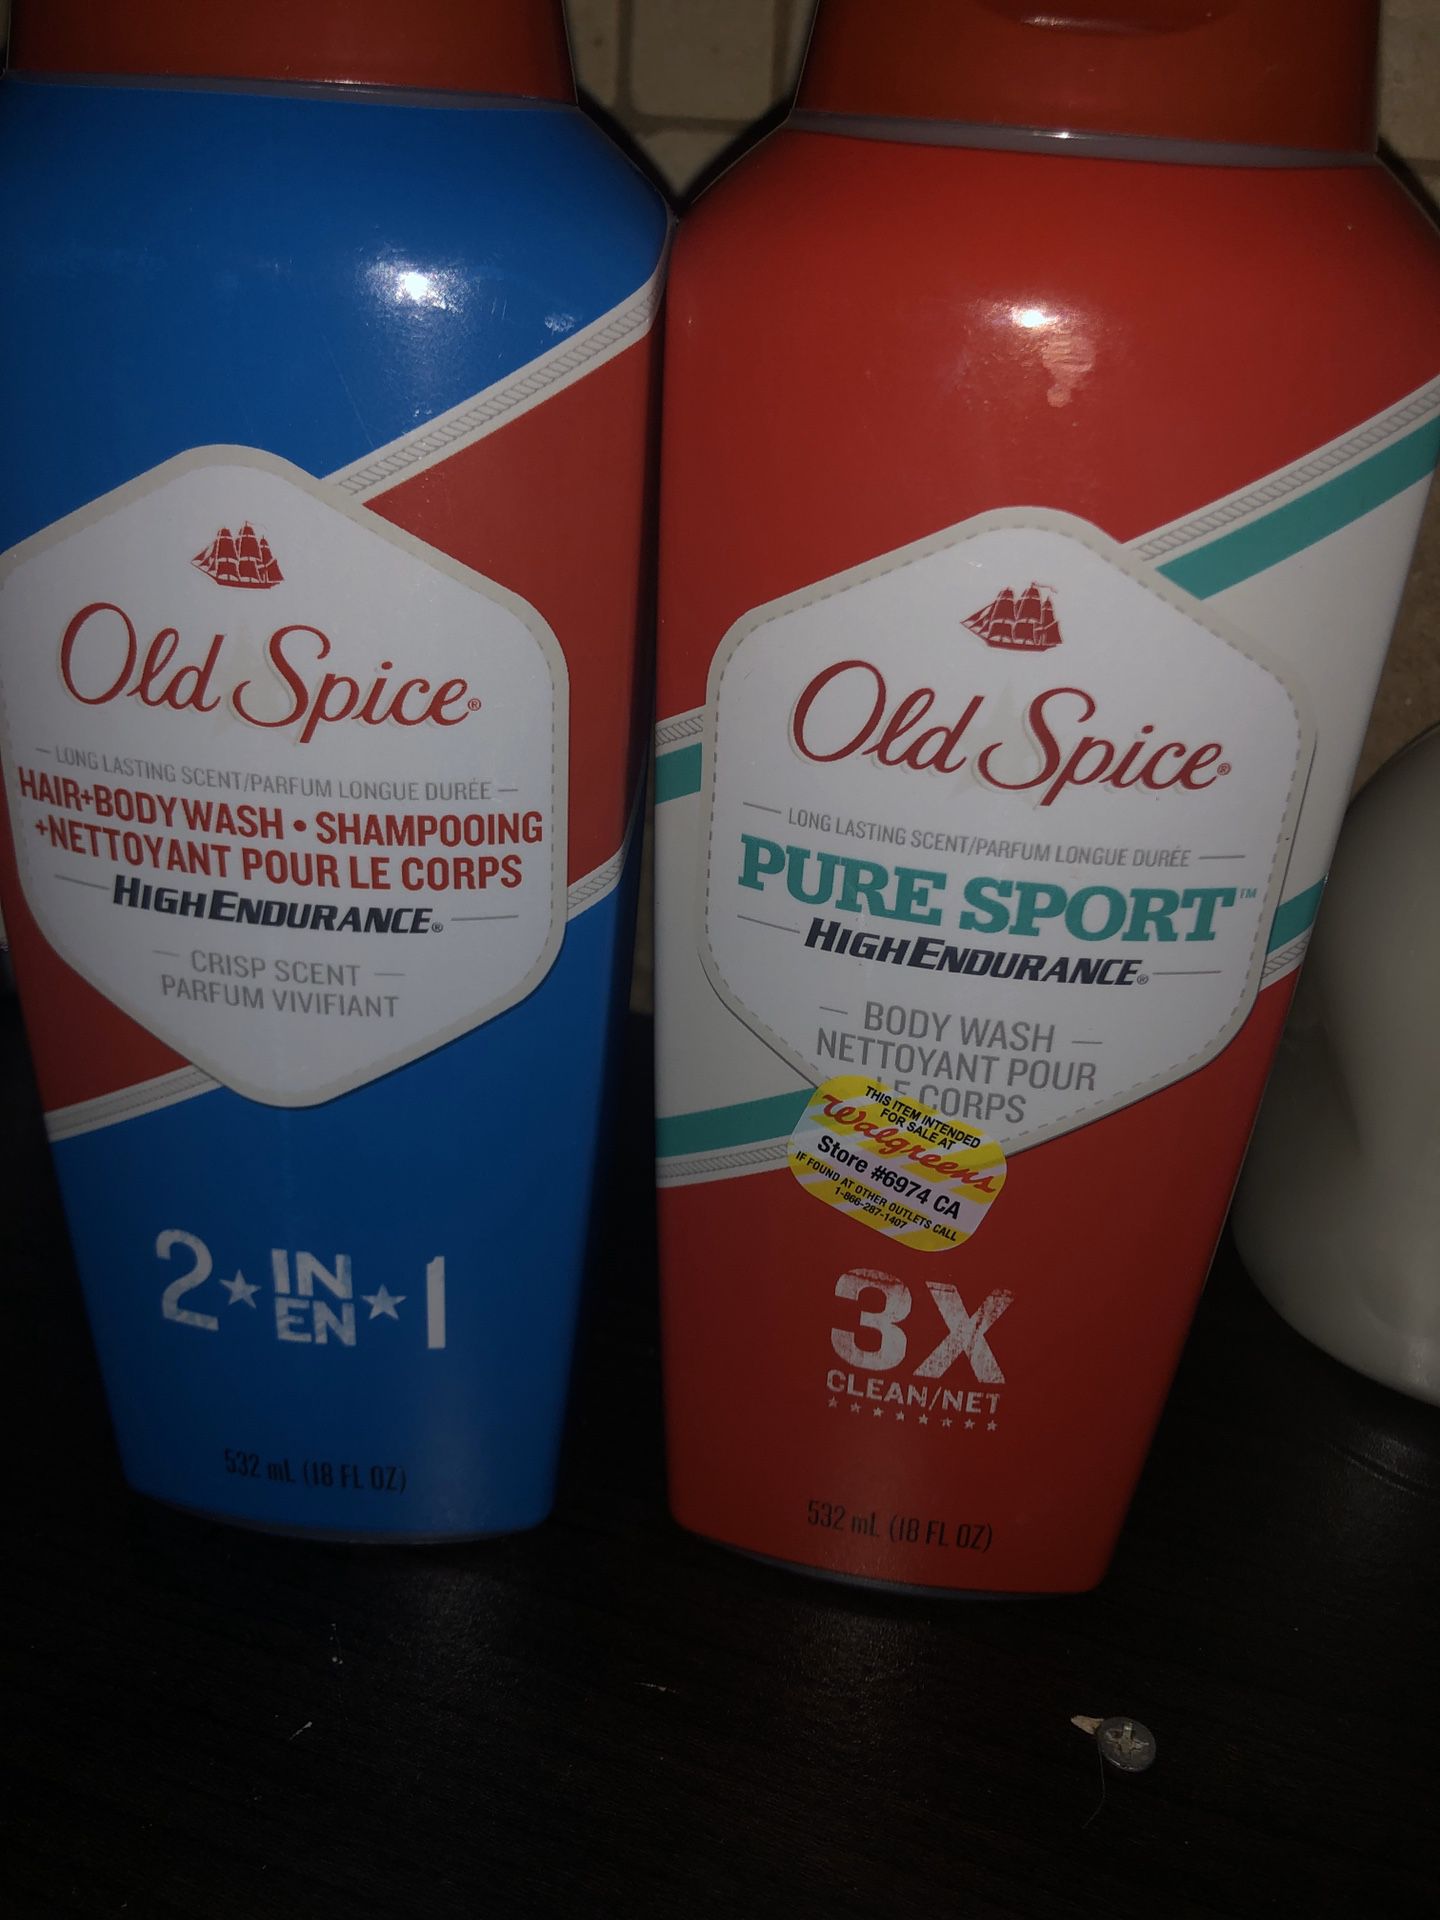 Old spice boby wash for me